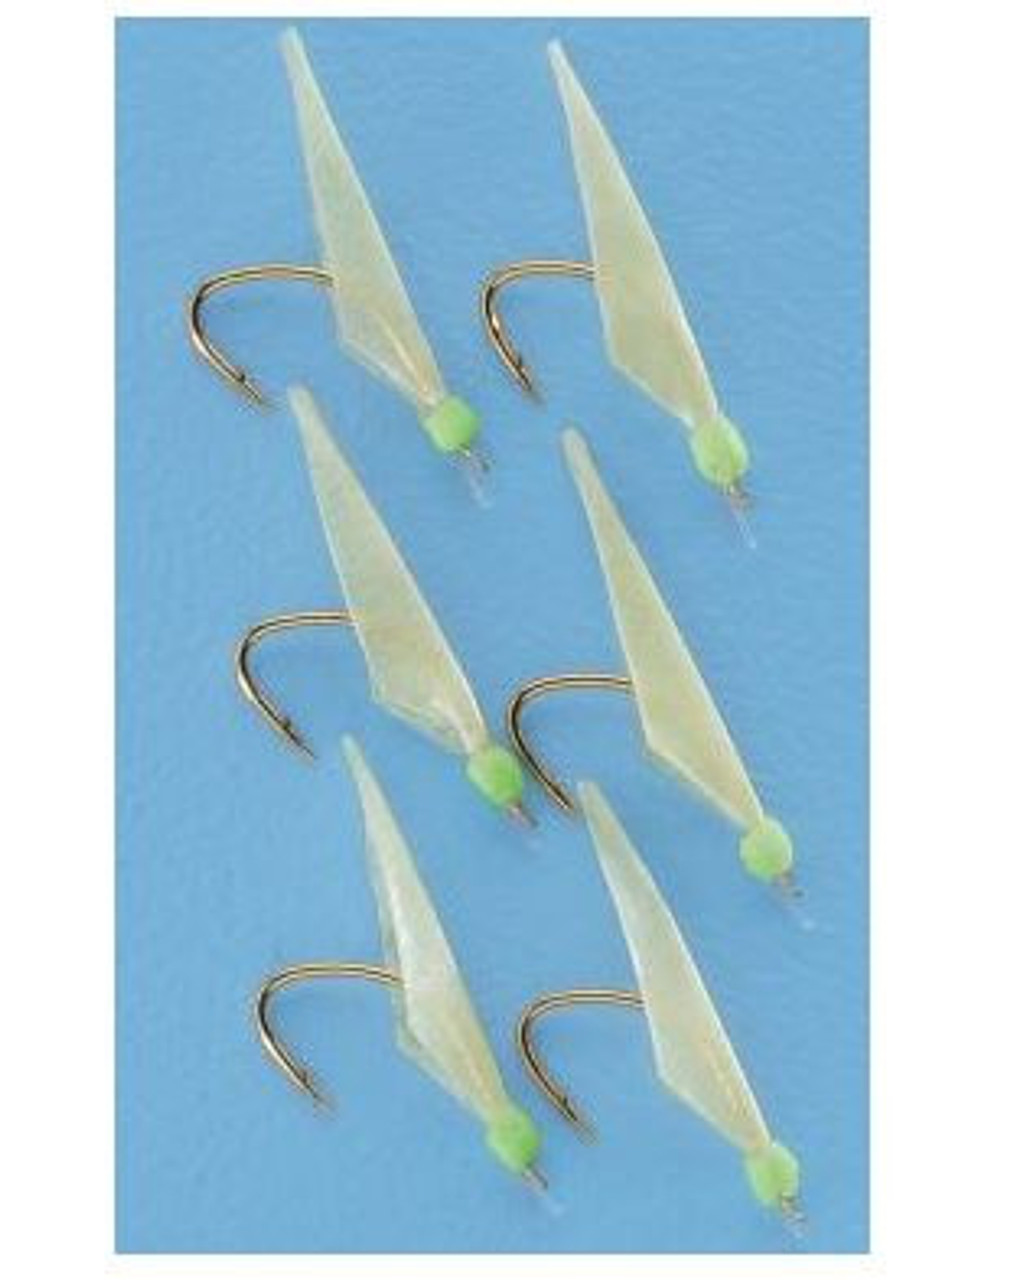 RG5 Bait Rig - 8 (size 5) hooks with fish skin & red/ green heads